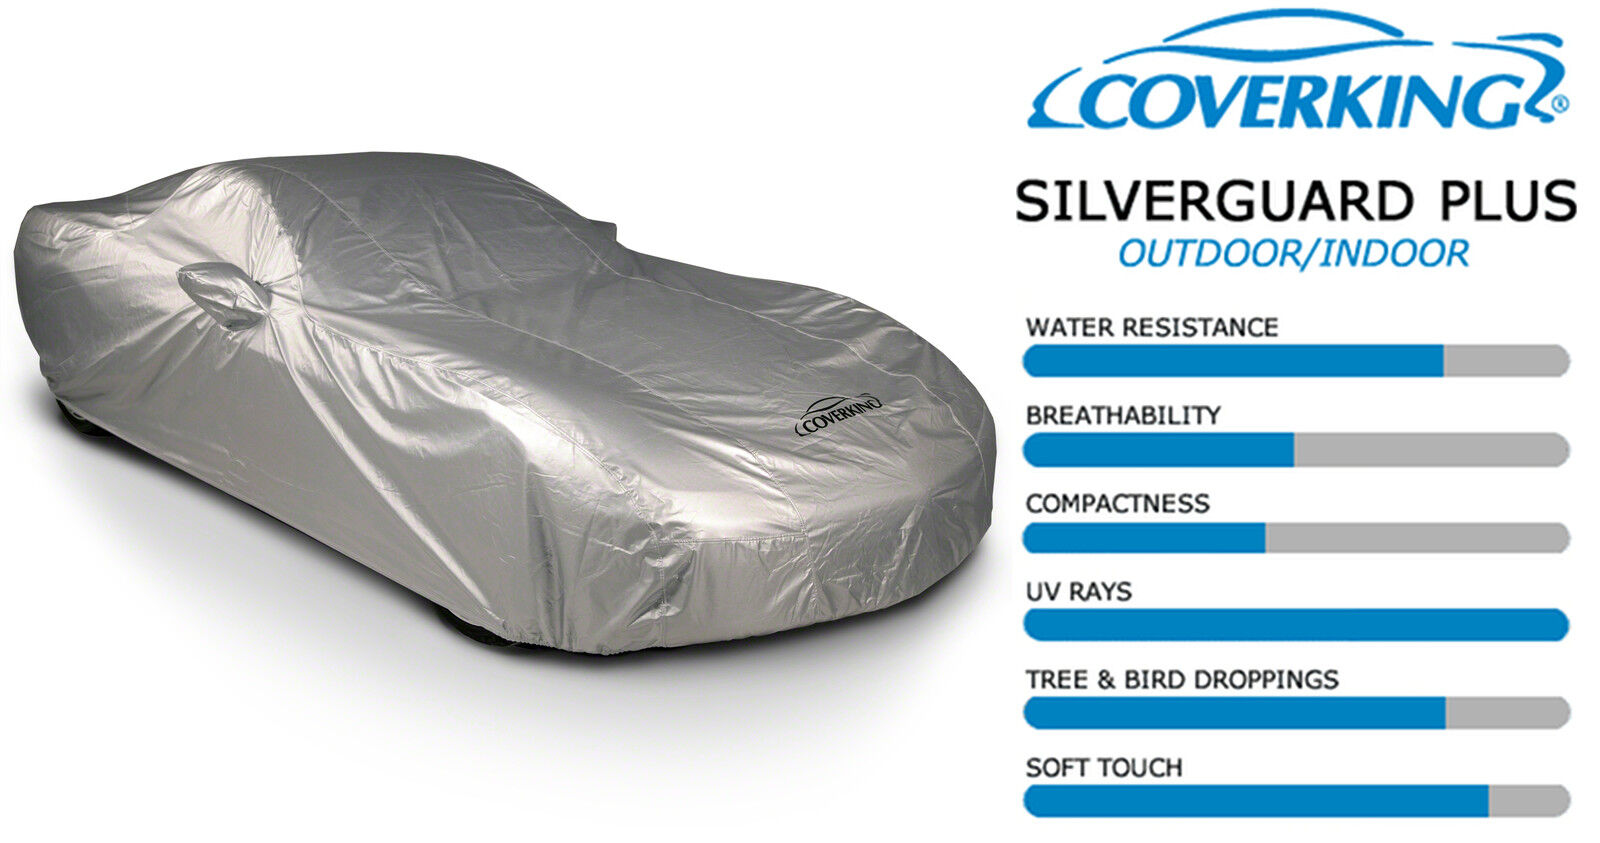 COVERKING SILVERGUARD PLUS all-weather CAR COVER made for 1988-1989 Porsche 959